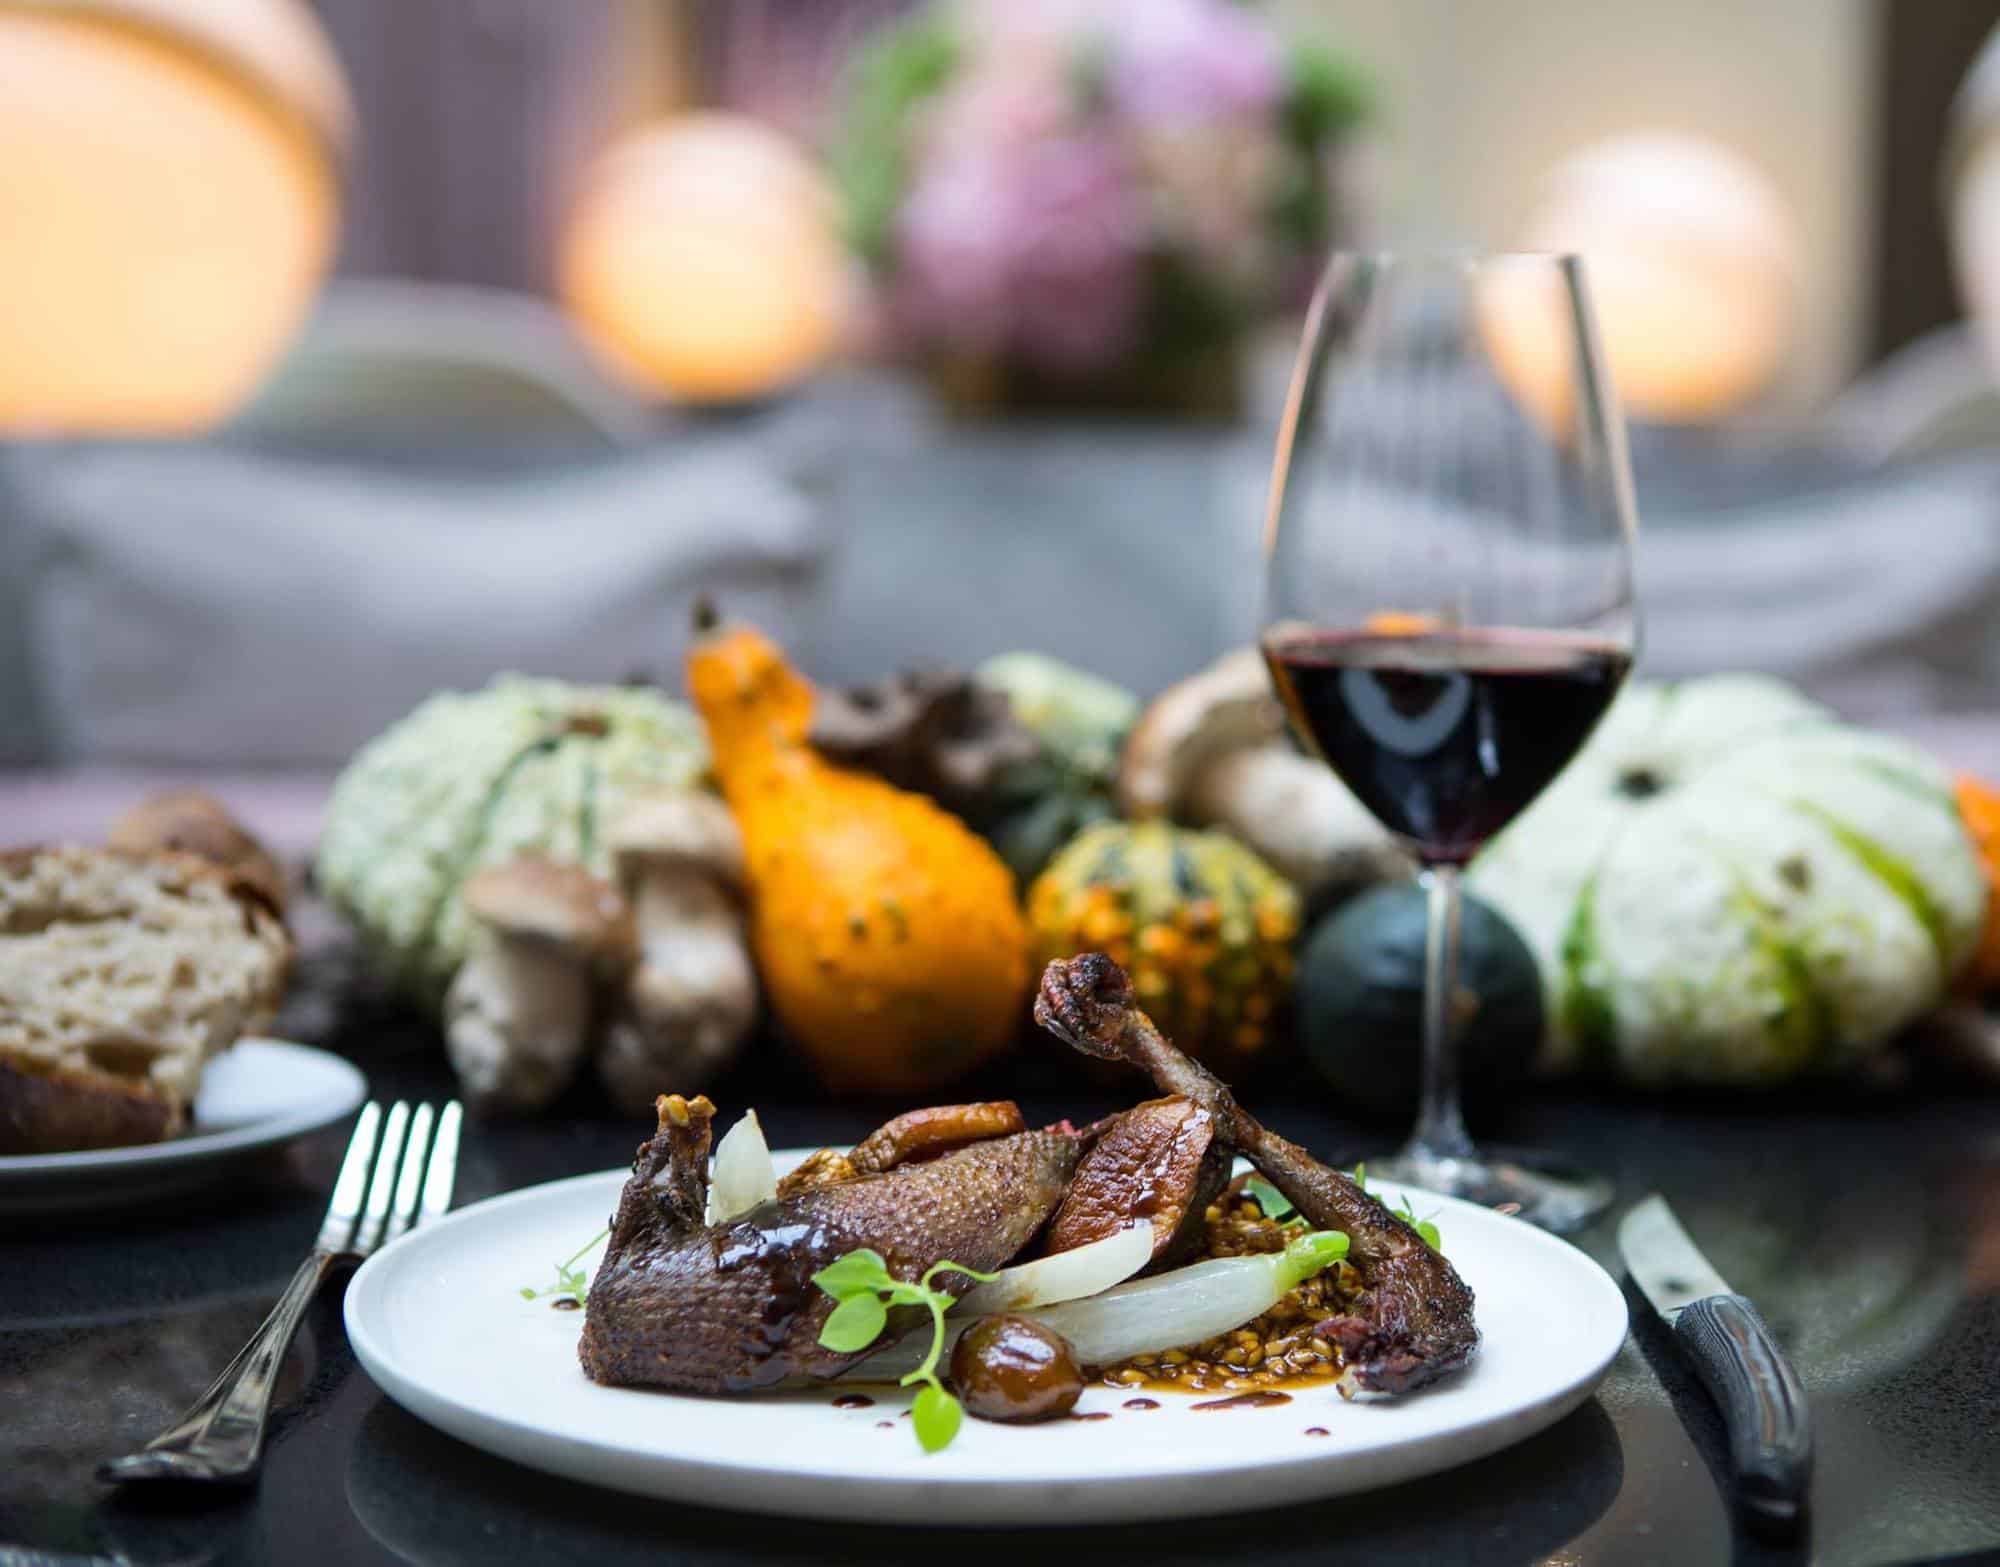 A white plate with roast pigeon, wheat risotto, turnip and chestnut, with cutlery on either side and a glass of red wine in the background, some bread, and an assortment of decorative squash.